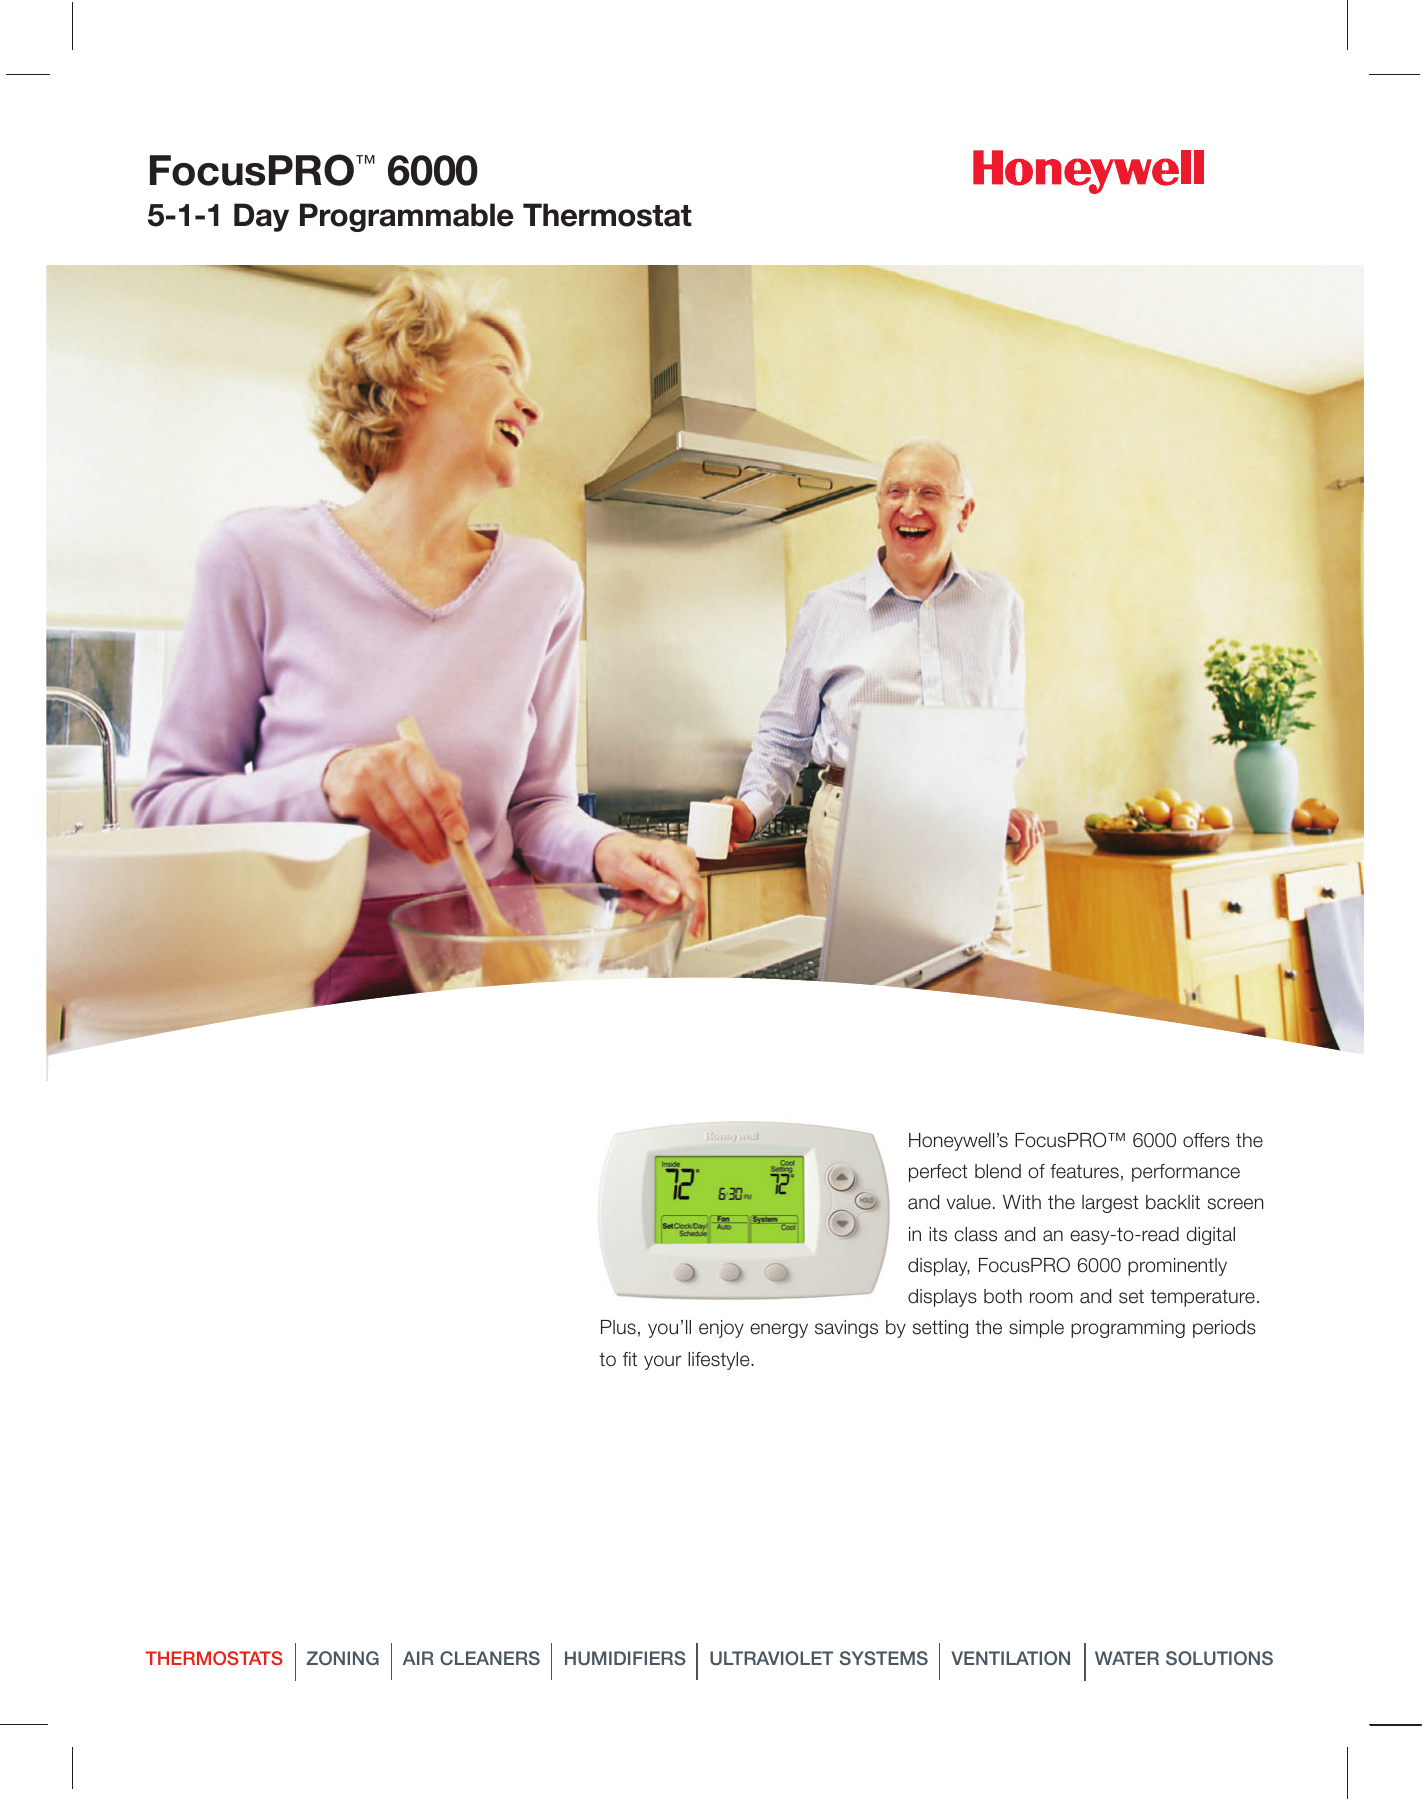 Page 1 of 2 - Honeywell Honeywell-Honeywell-Thermostat-6000-Users-Manual- 50-9278 - FocusPRO 6000 5-1-1 Day Programmable Thermostat  Honeywell-honeywell-thermostat-6000-users-manual